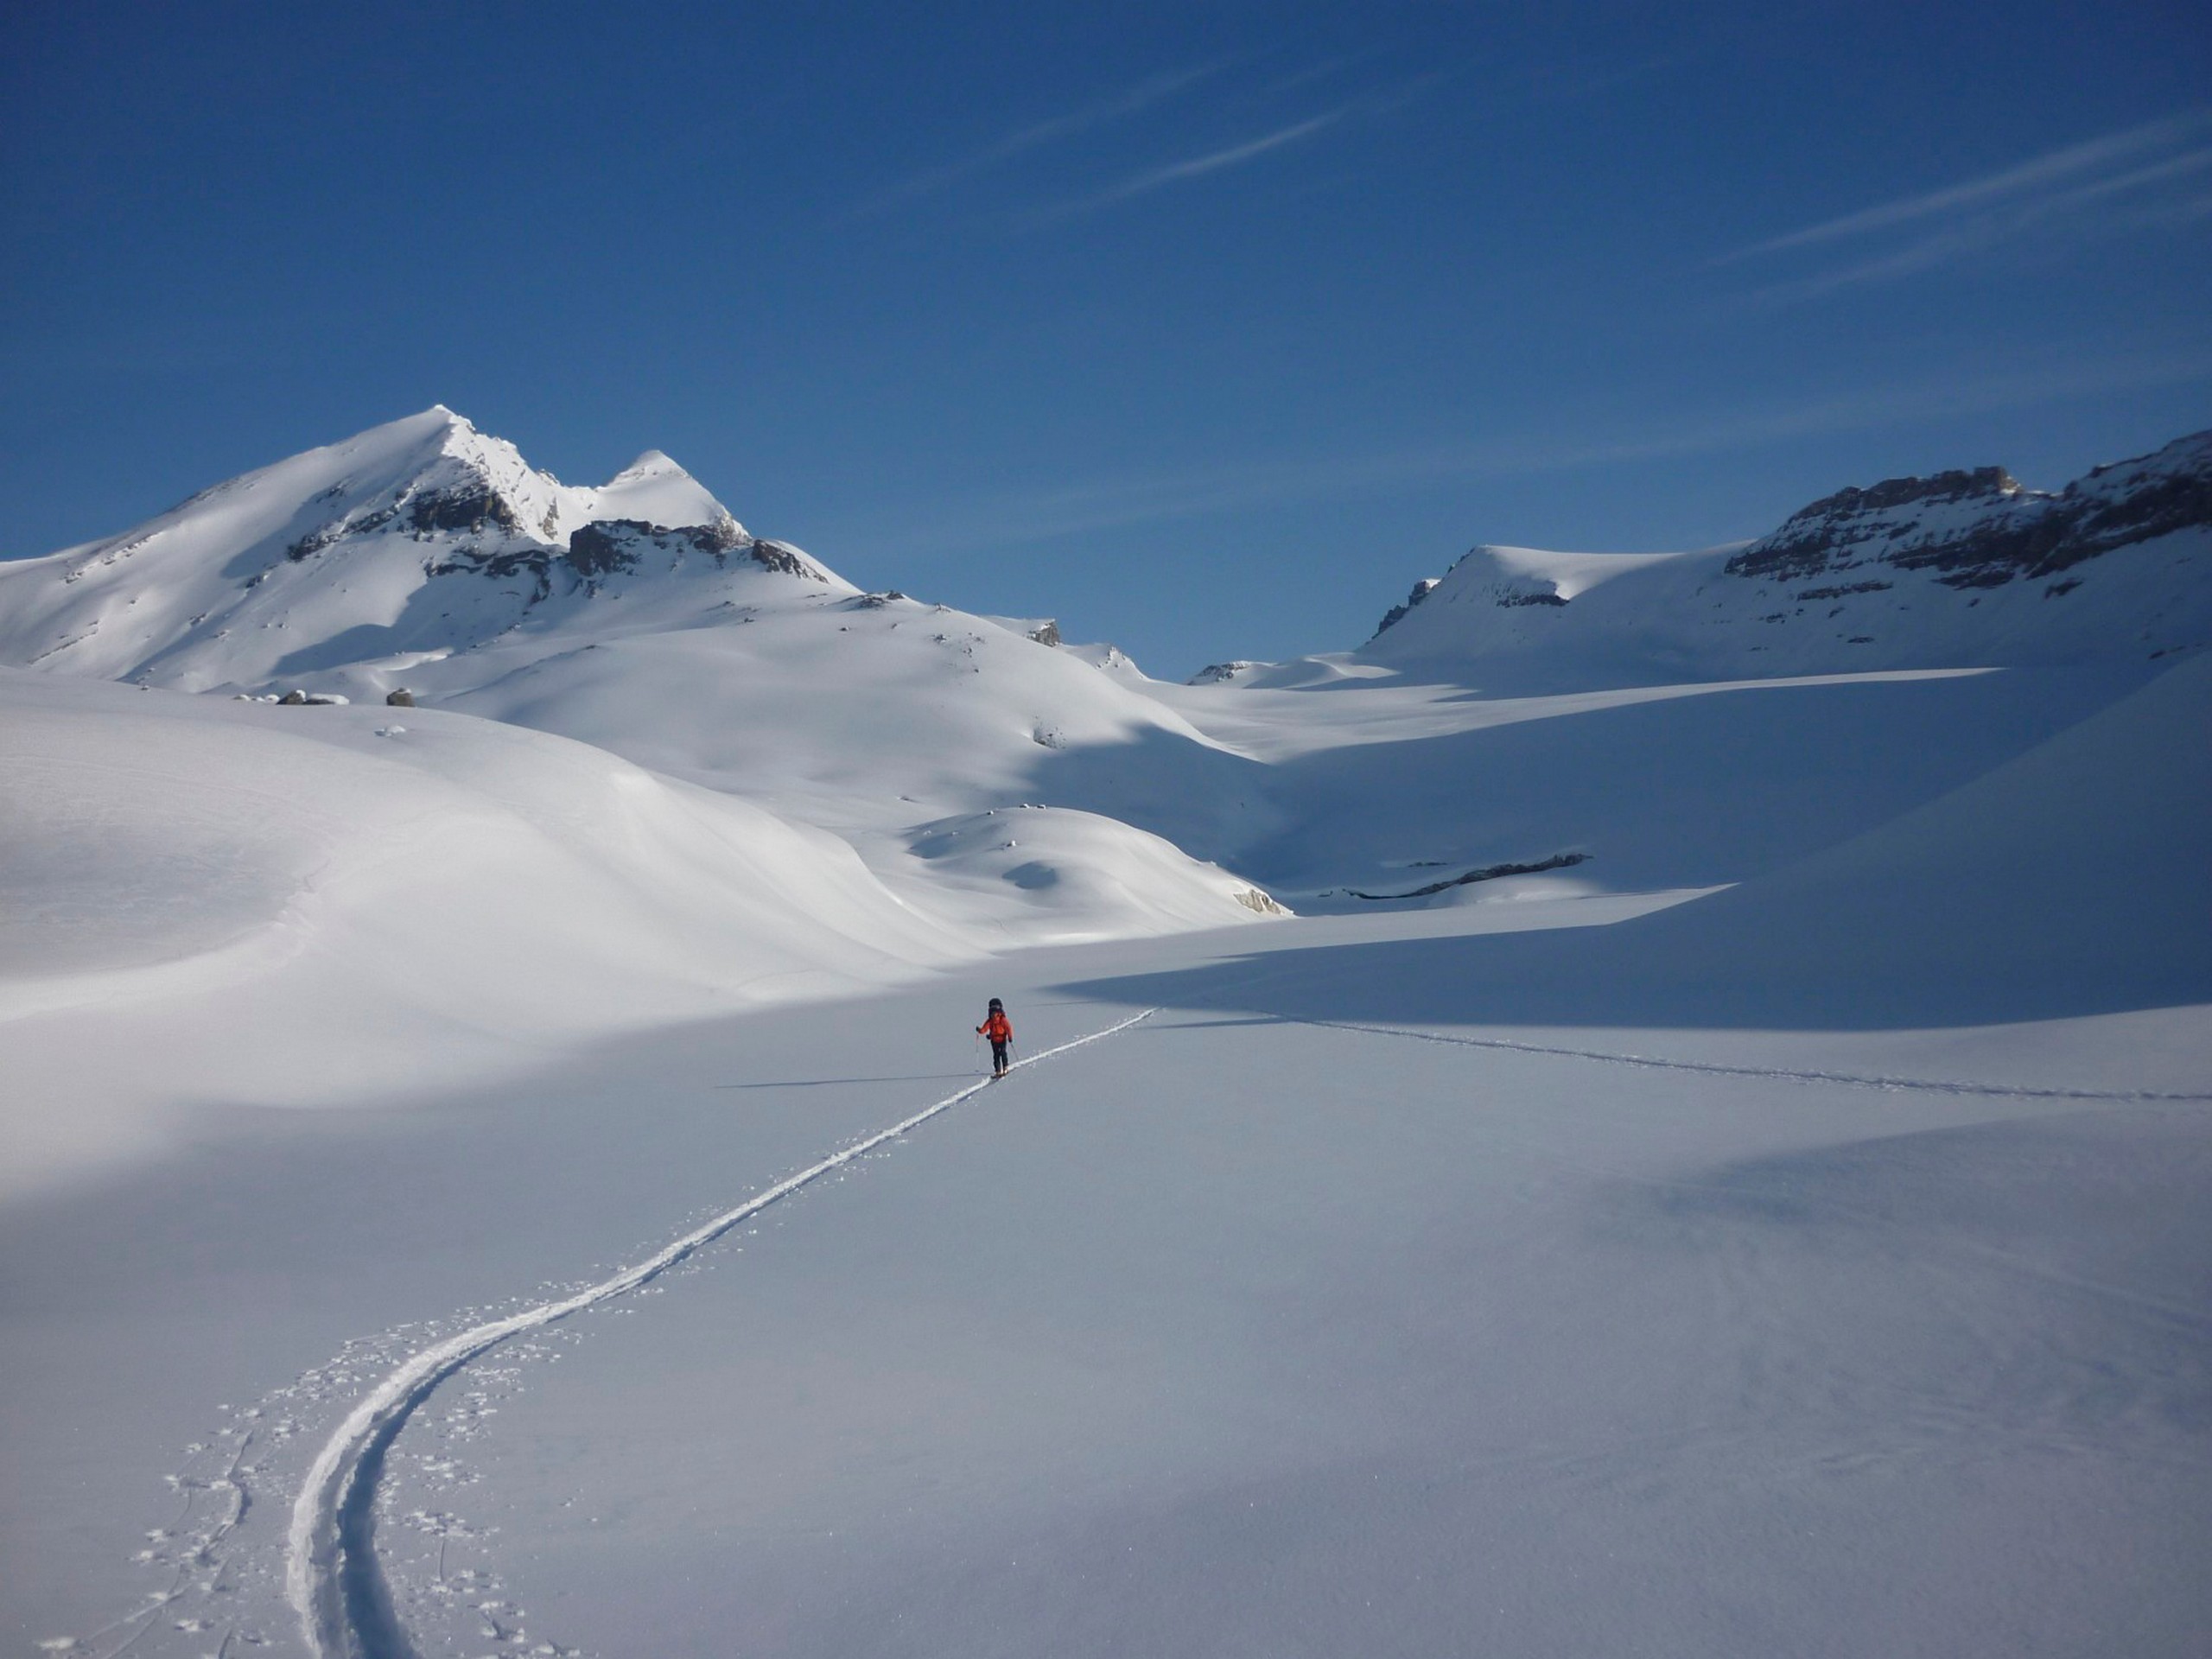 Wapta Icefield during the winter